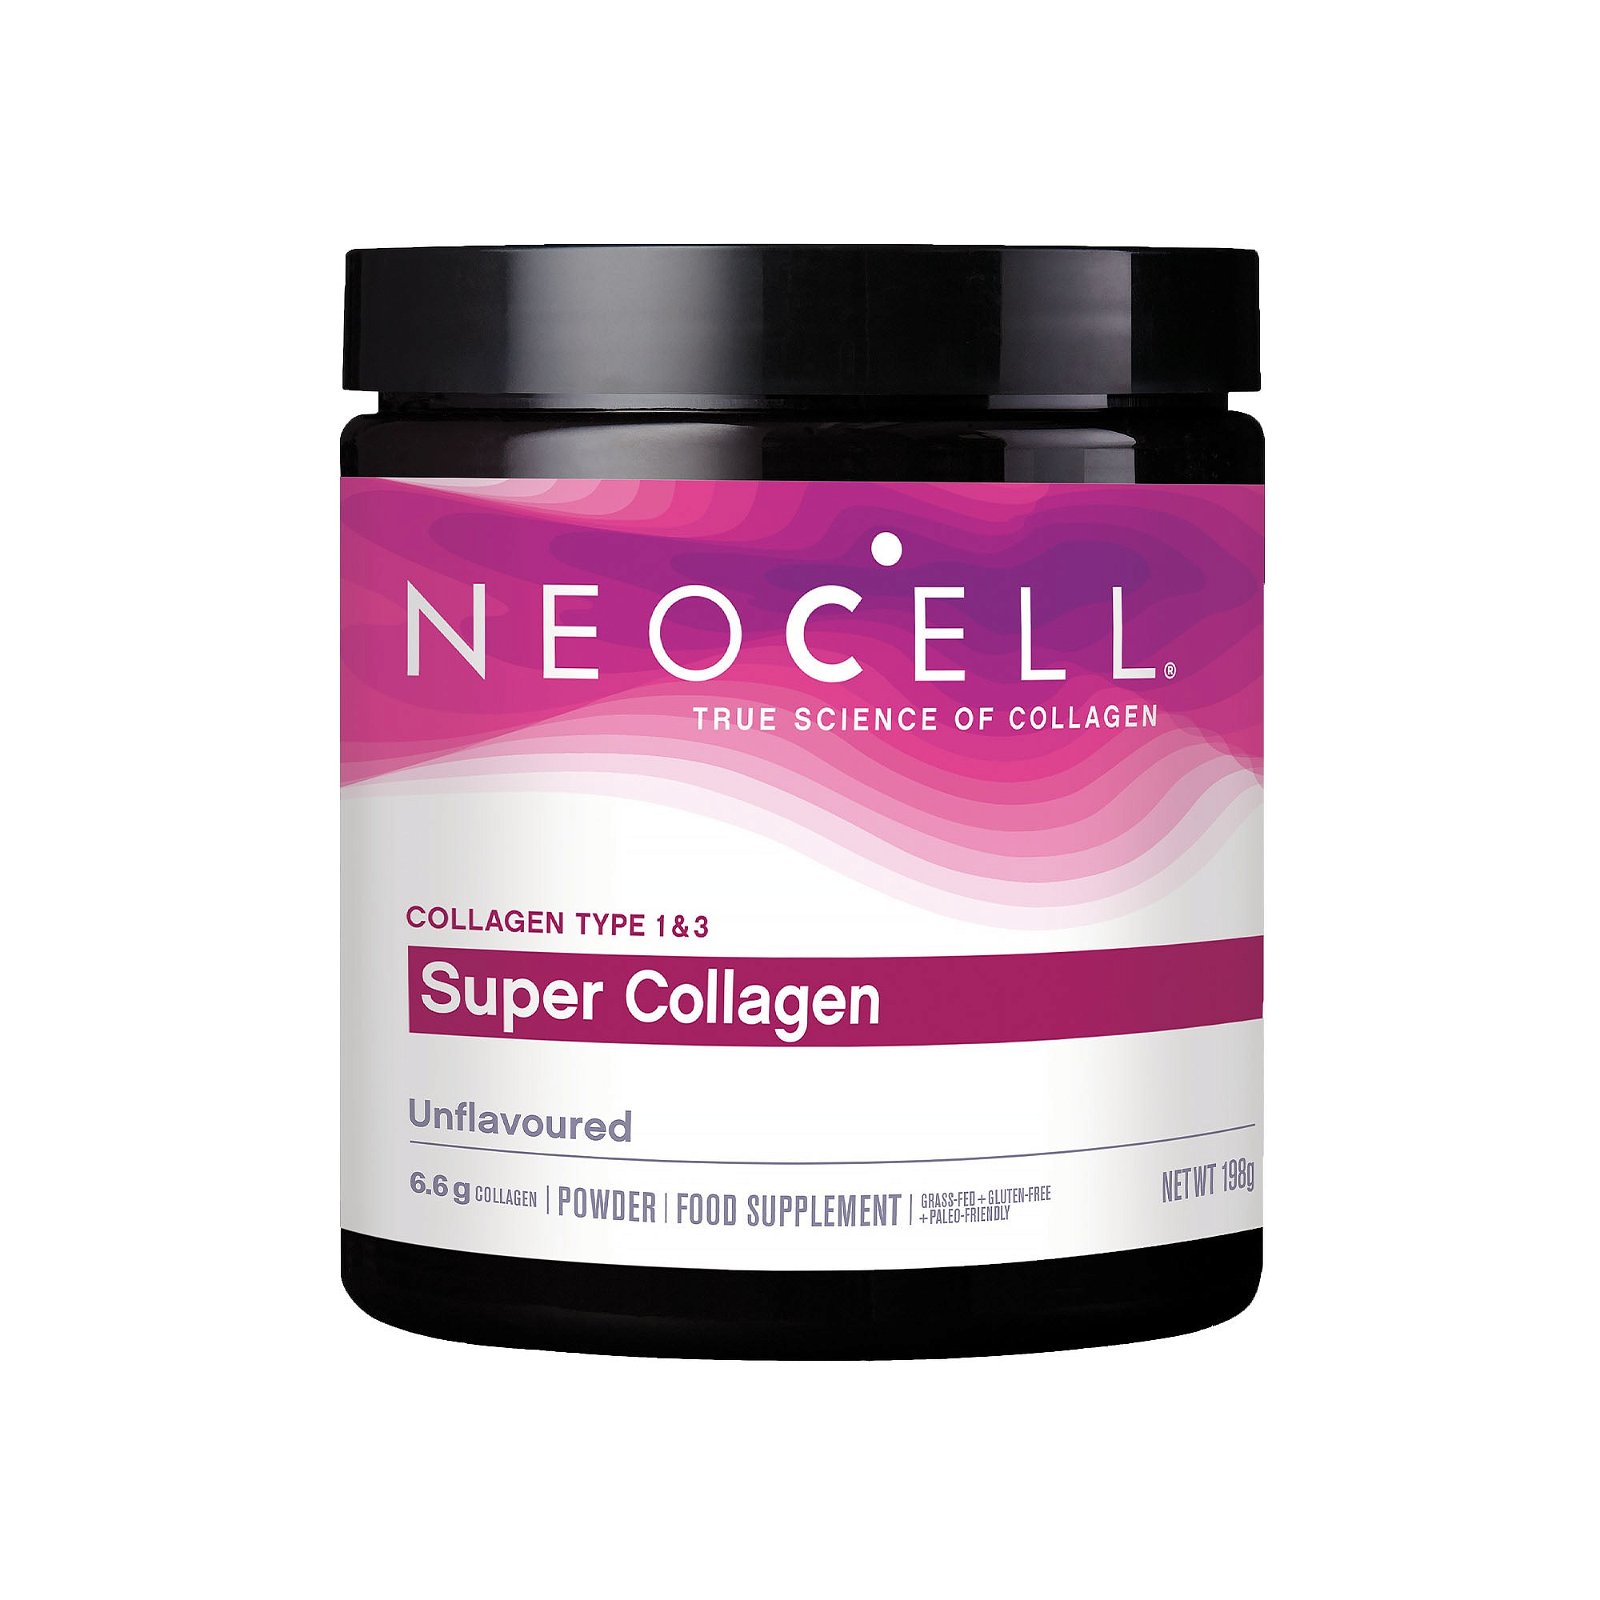 20% off Neocell Collagen